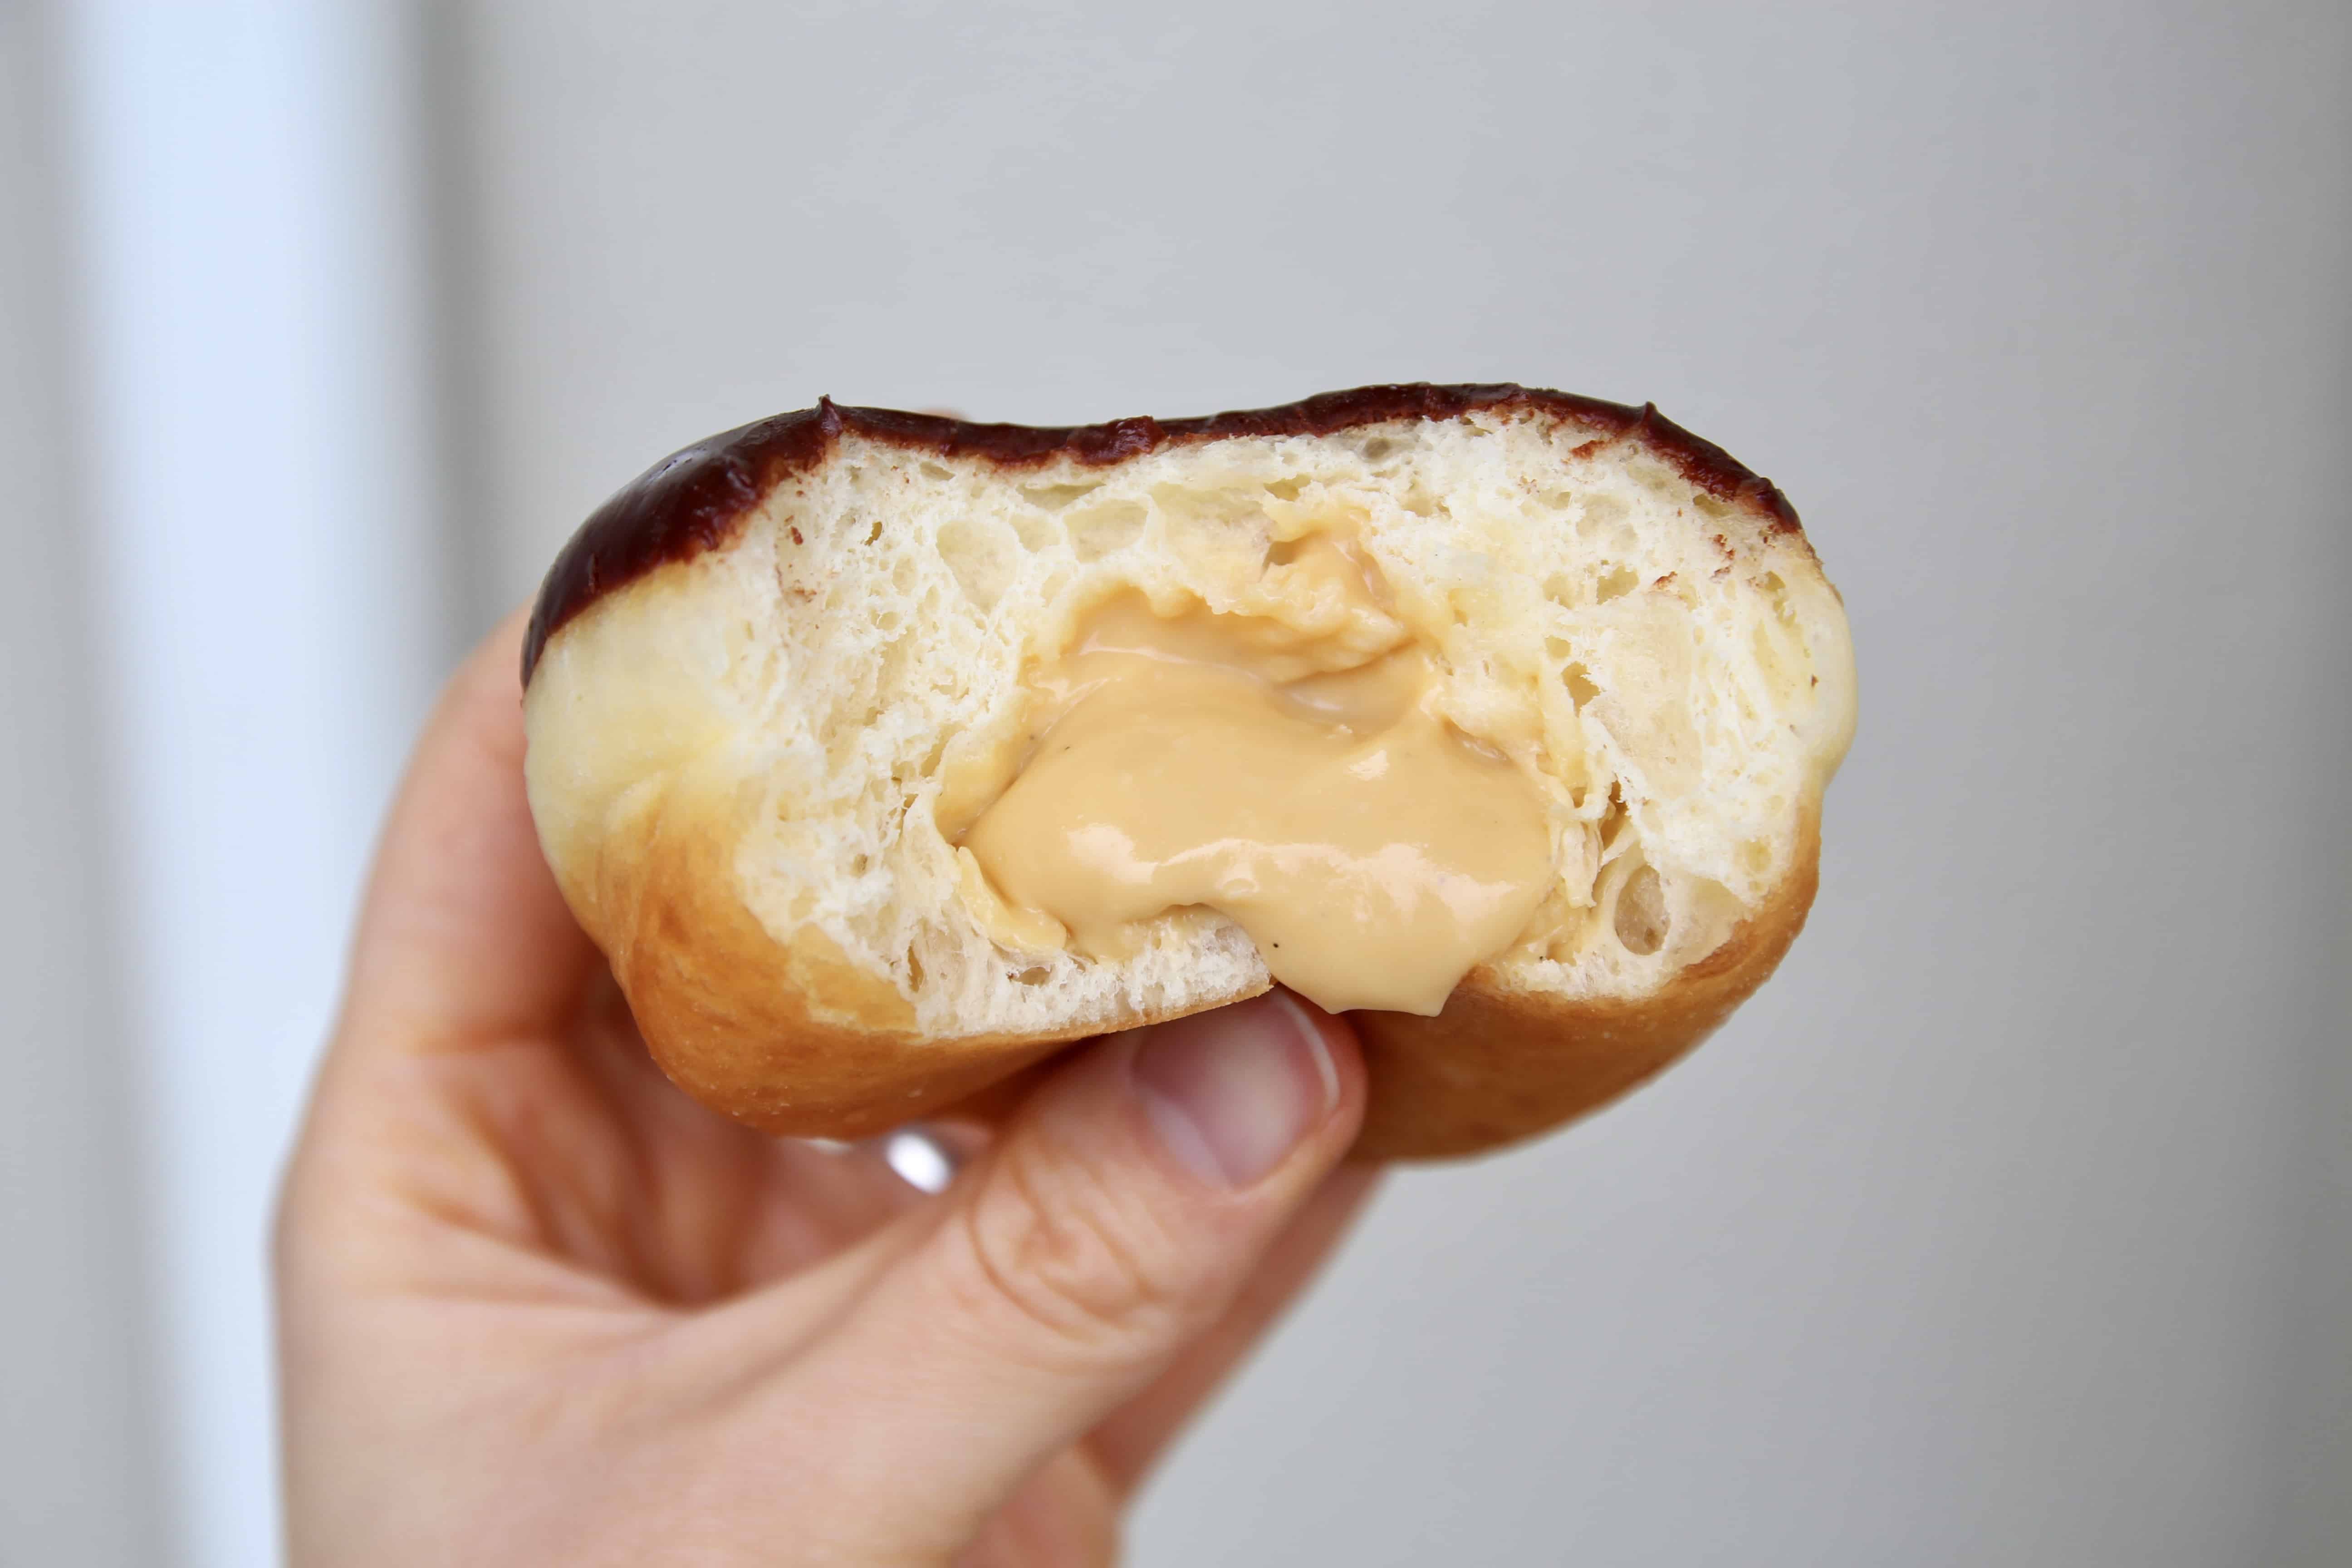 A bitten donut with custard filling and chocolate glaze